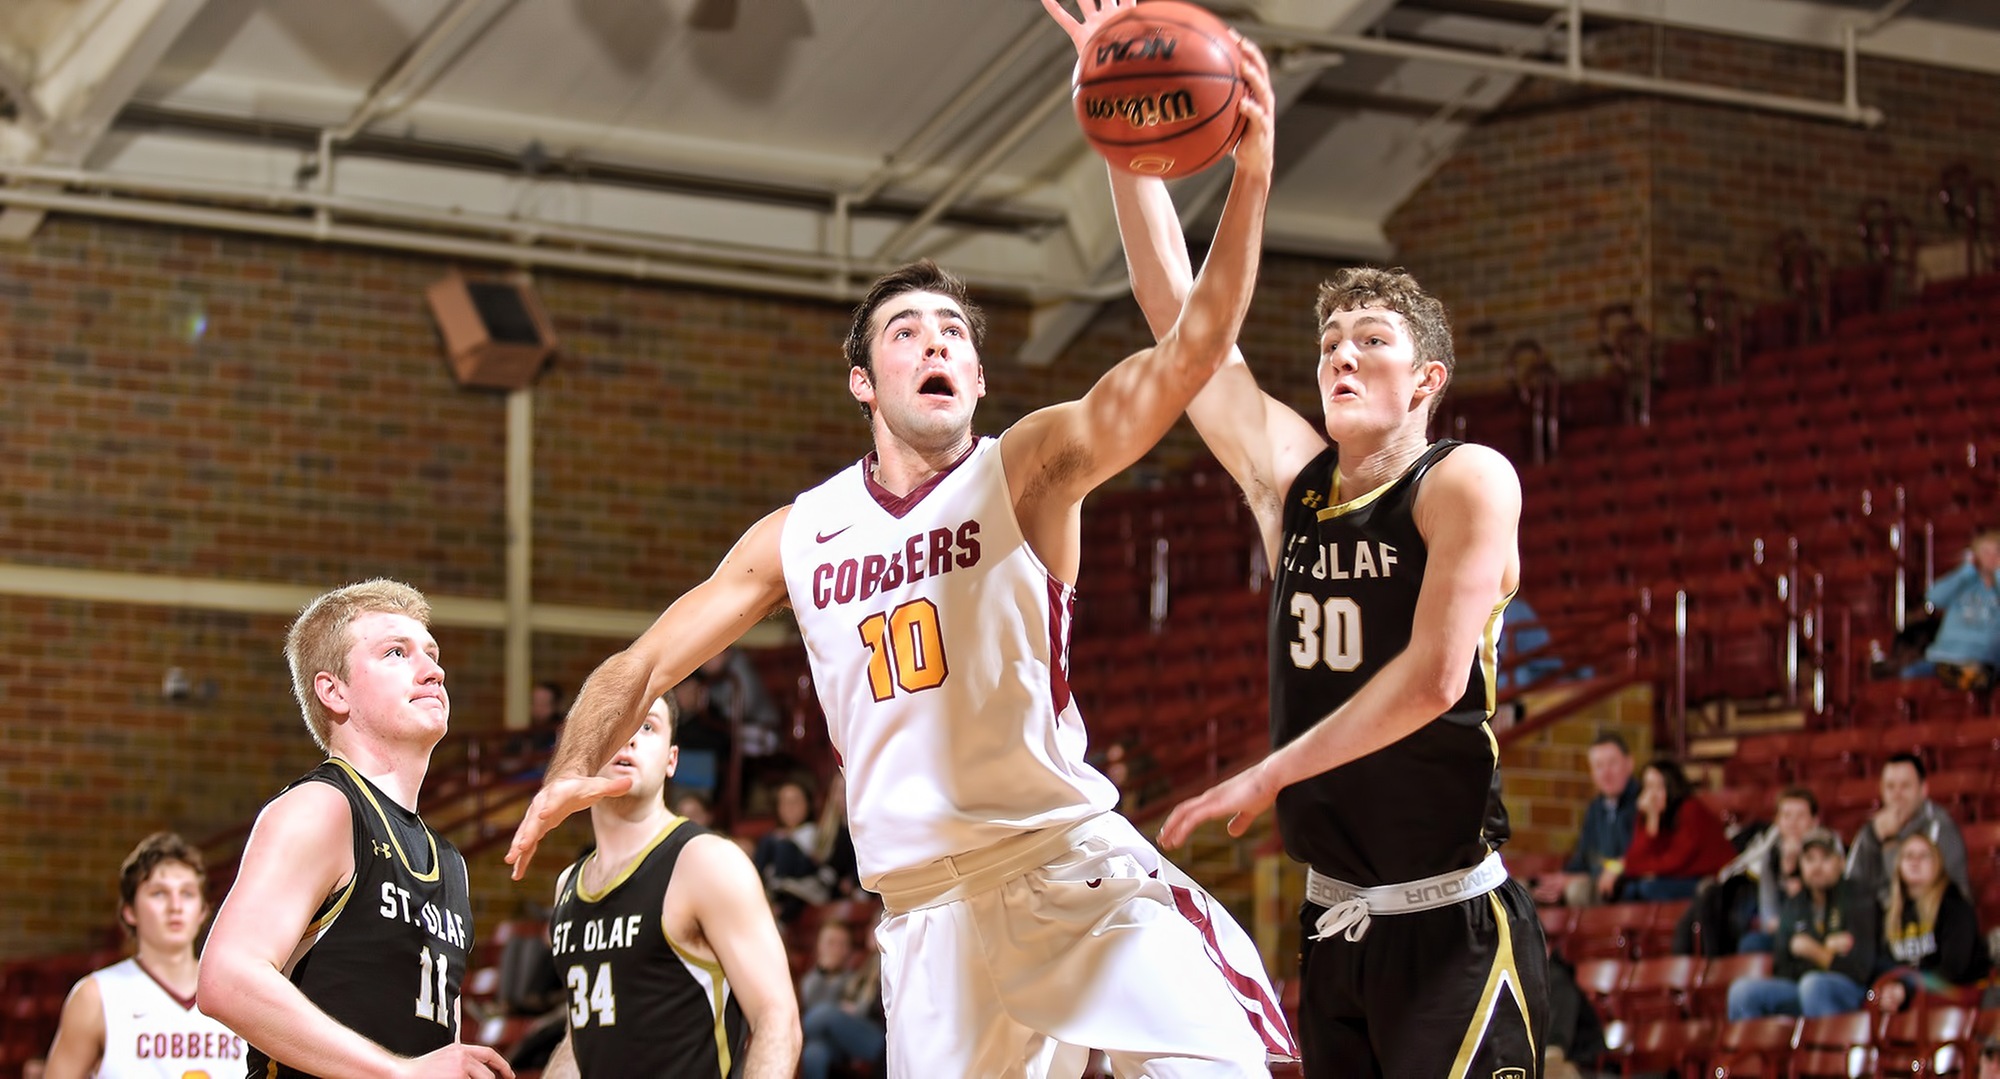 Senior Tommy Schyma goes to the basket in the second half for two of his game-high 18 points against St. Olaf.